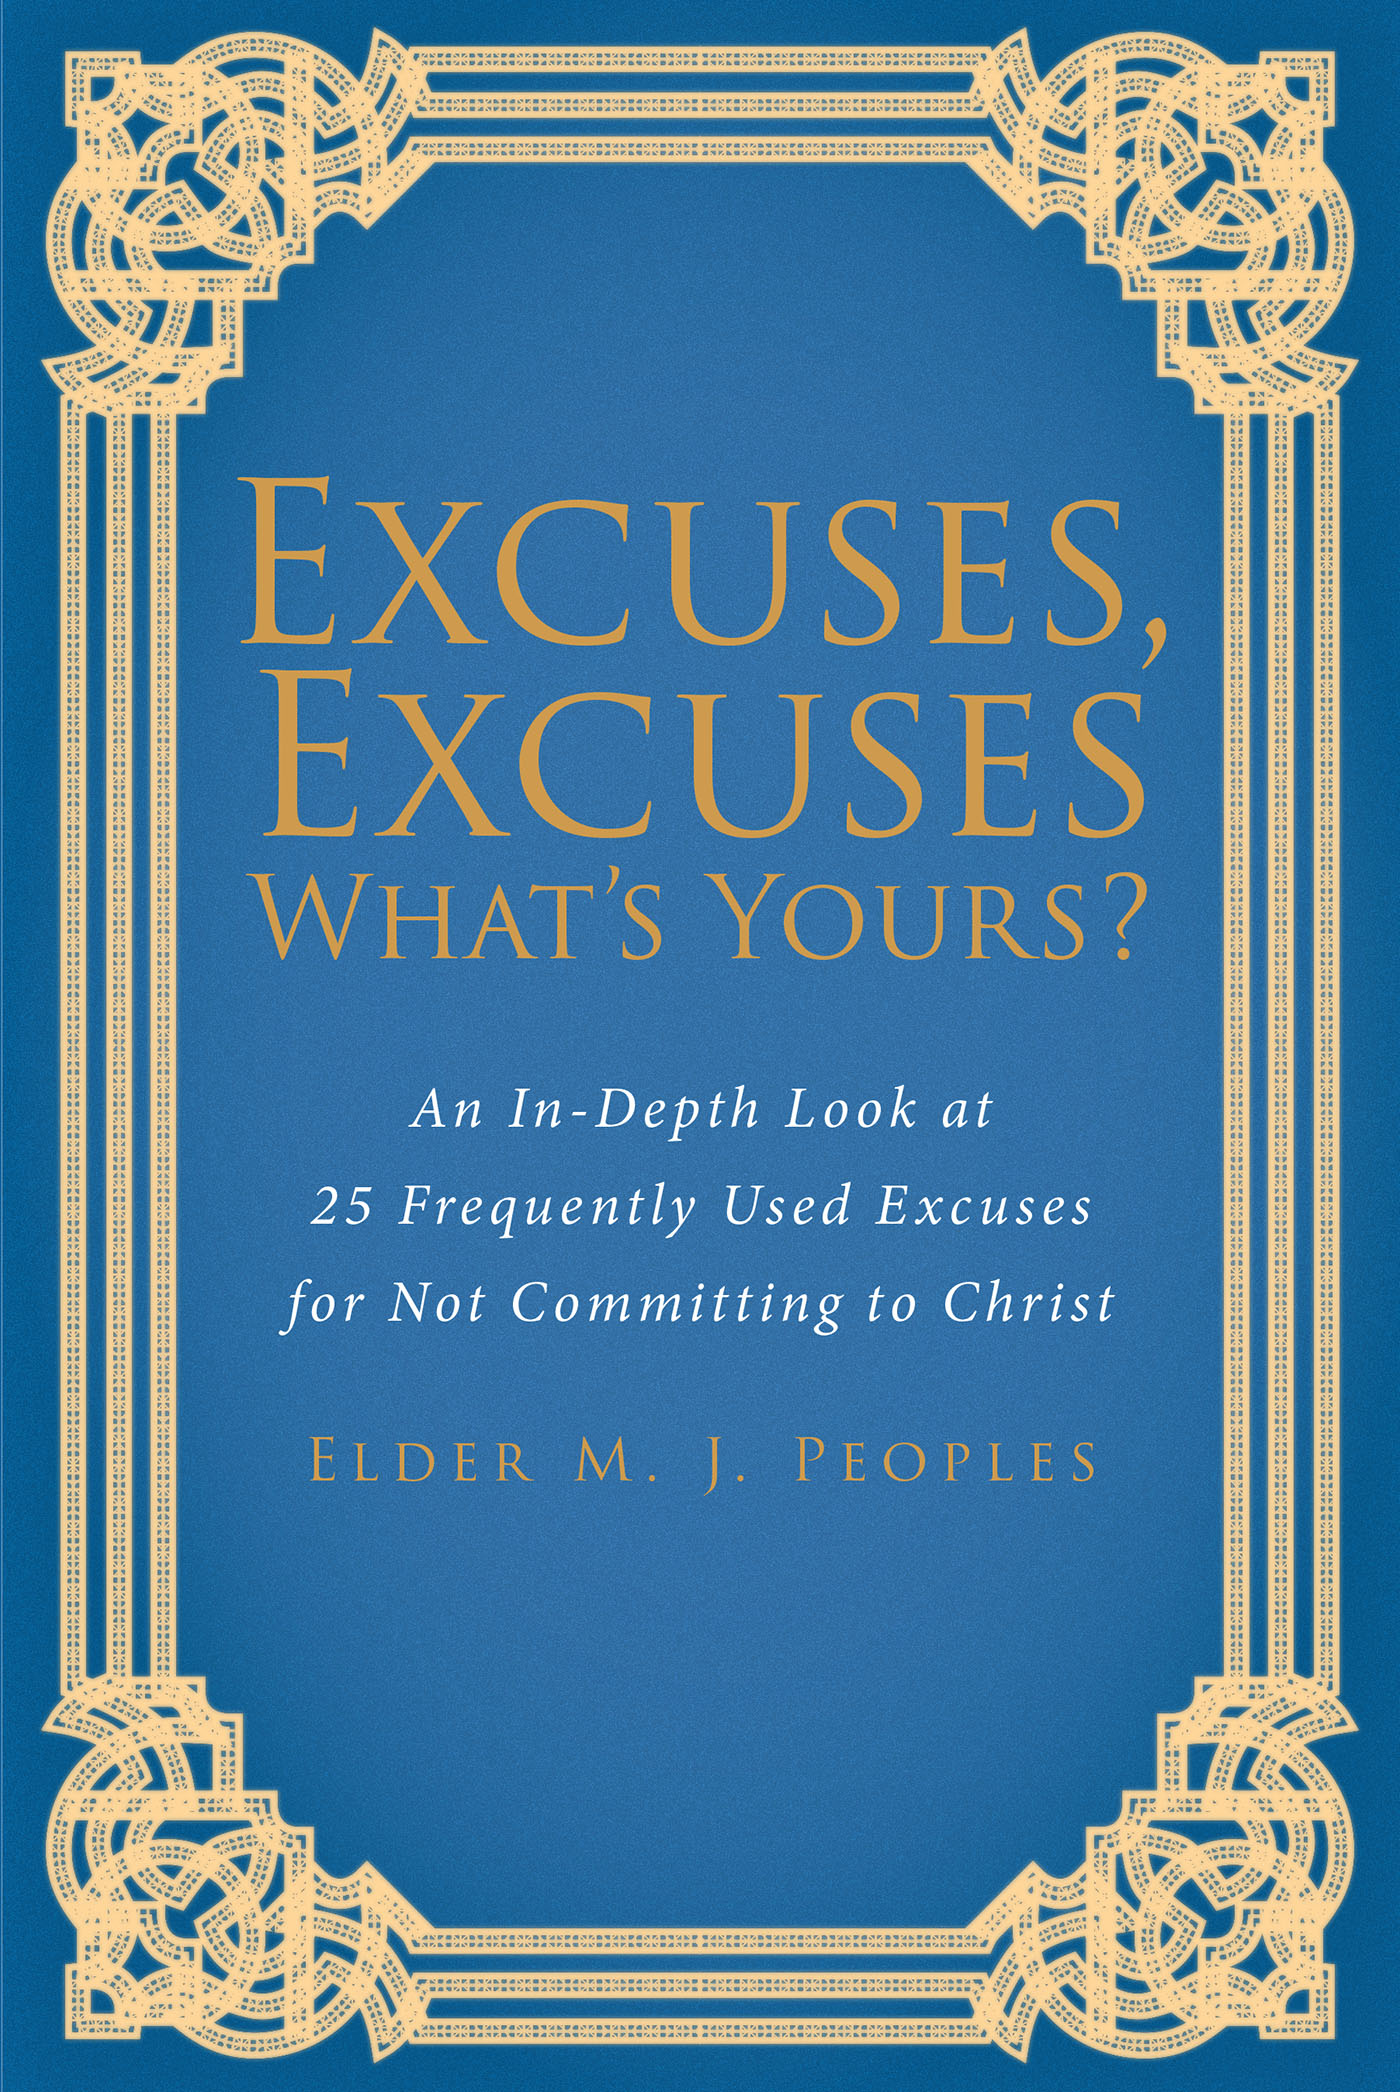 Elder M. J. Peoples’s Newly Released "Excuses, Excuses What’s Yours?" is a Thoughtful Discussion of Common Arguments Against Living in Faith